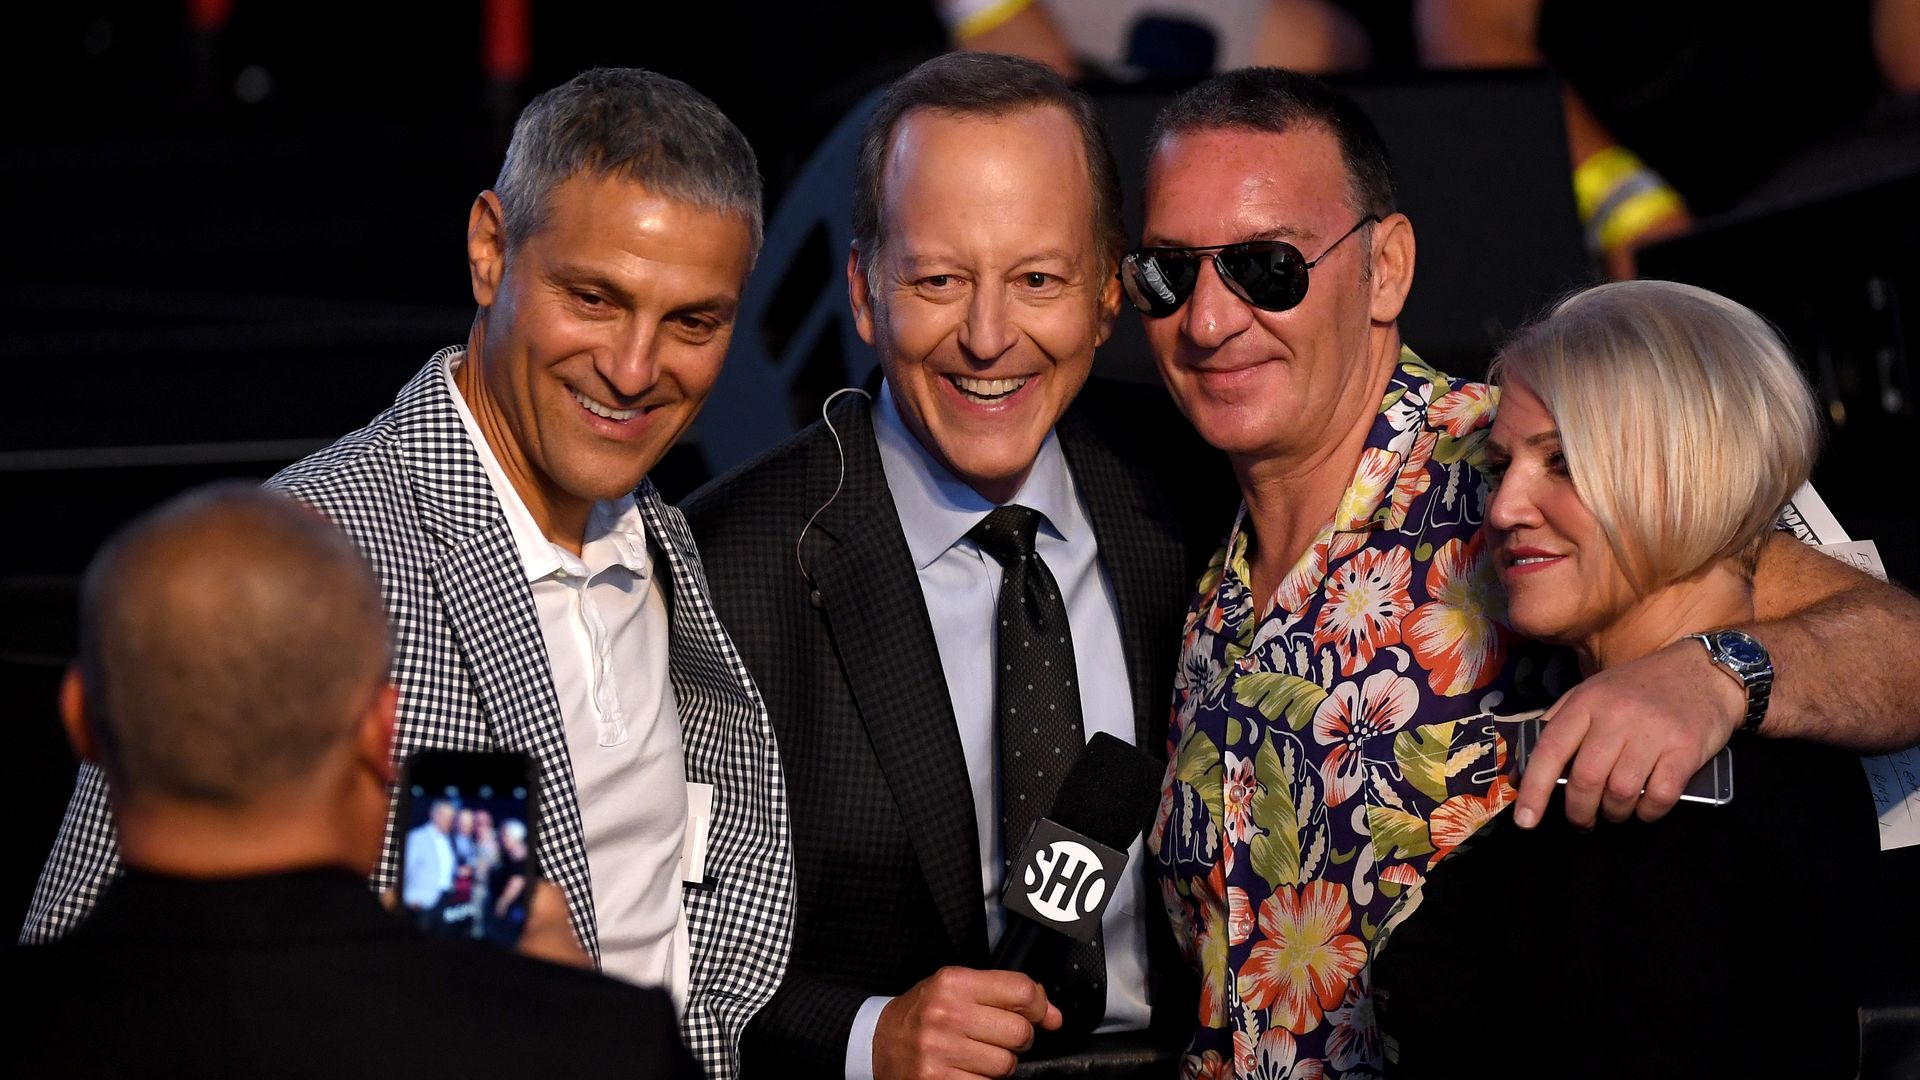 In this image, Ari Emanuel poses with two men and a blonde woman for a picture.